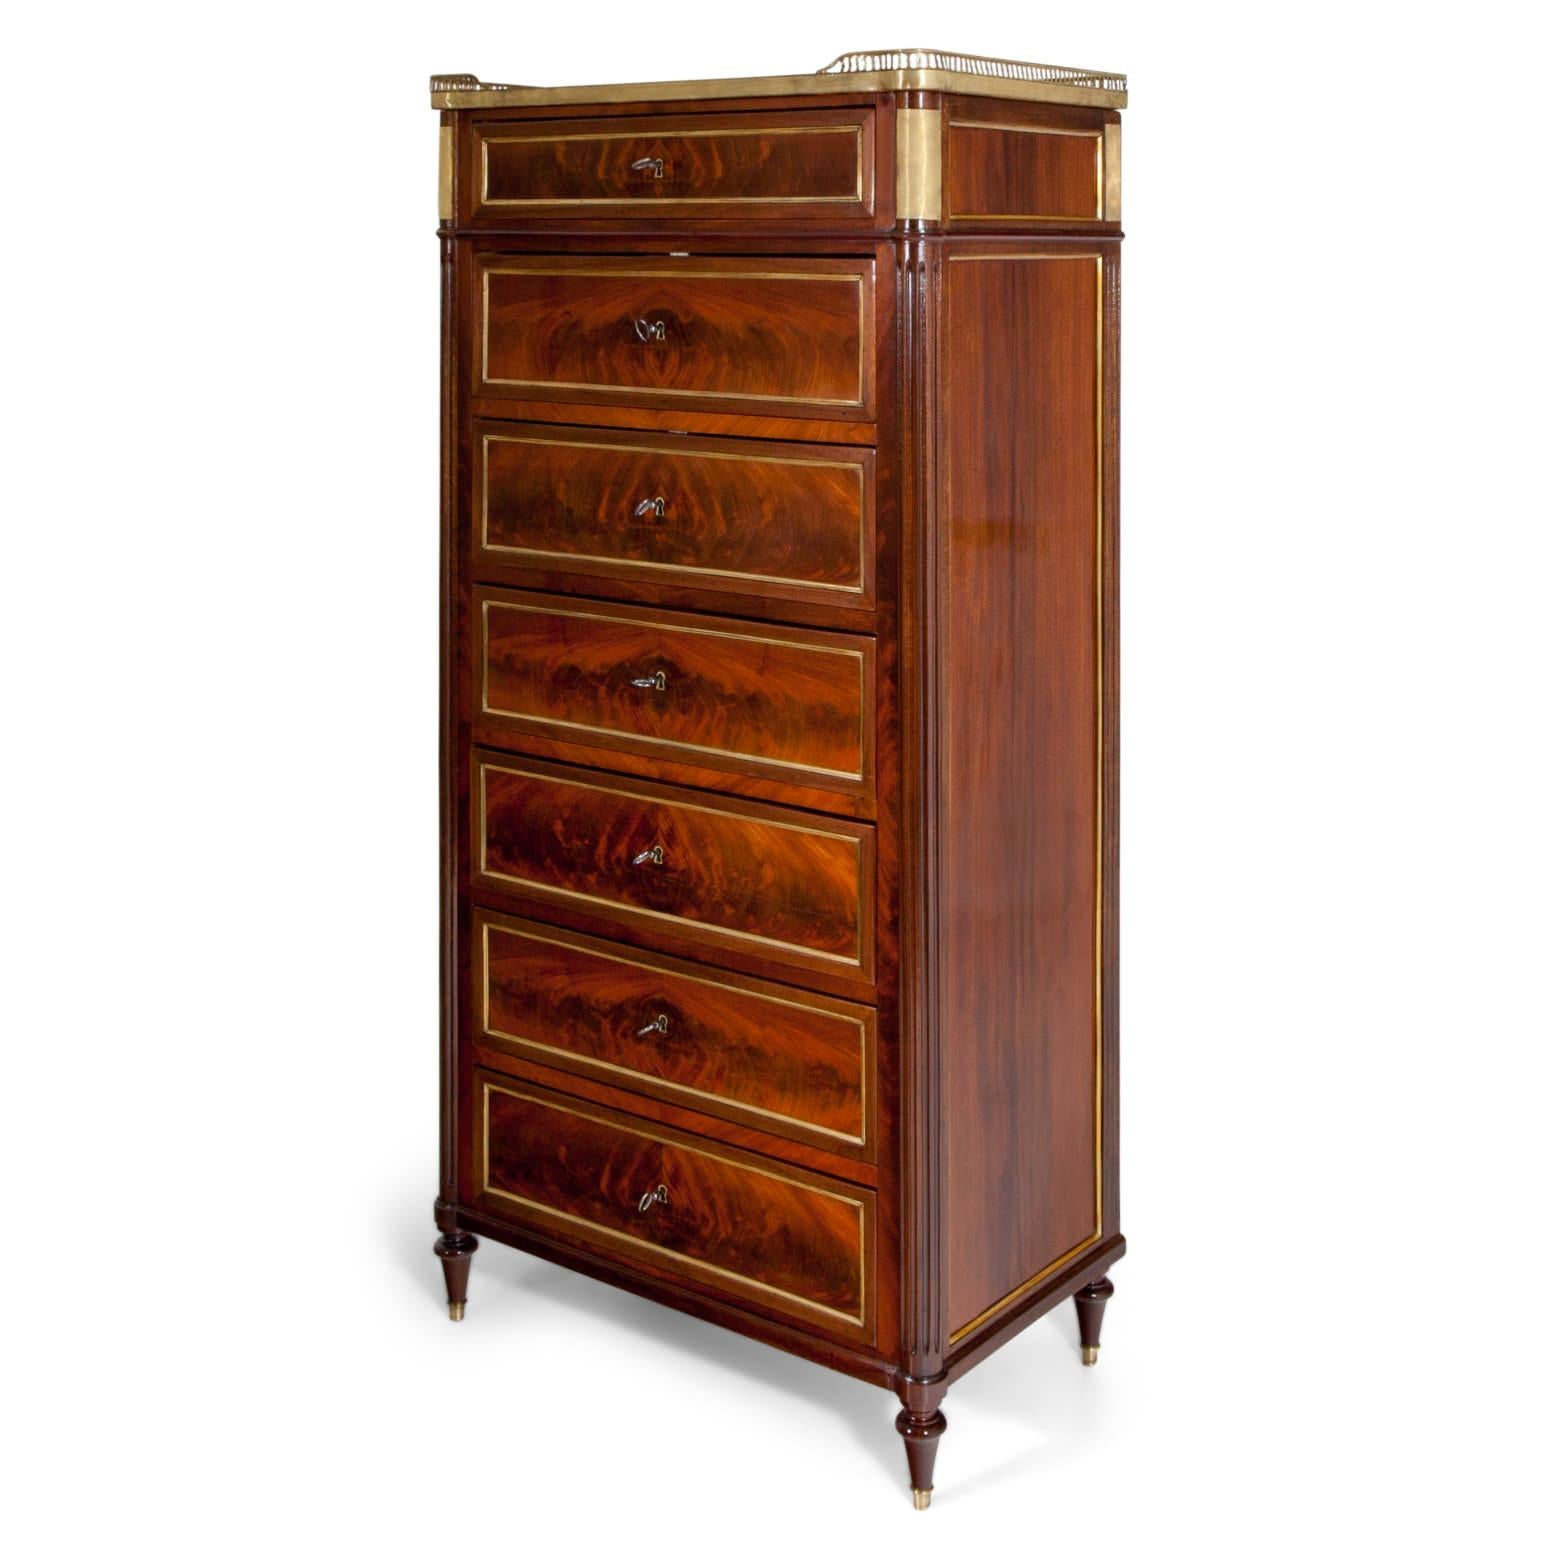 Tall chest of drawers with seven drawers and rounded, fluted corners, standing on conical feet with brass sabots. The top drawer is accentuated with brass fittings and the top is framed on three sides with a short balustrade. Each drawer is framed